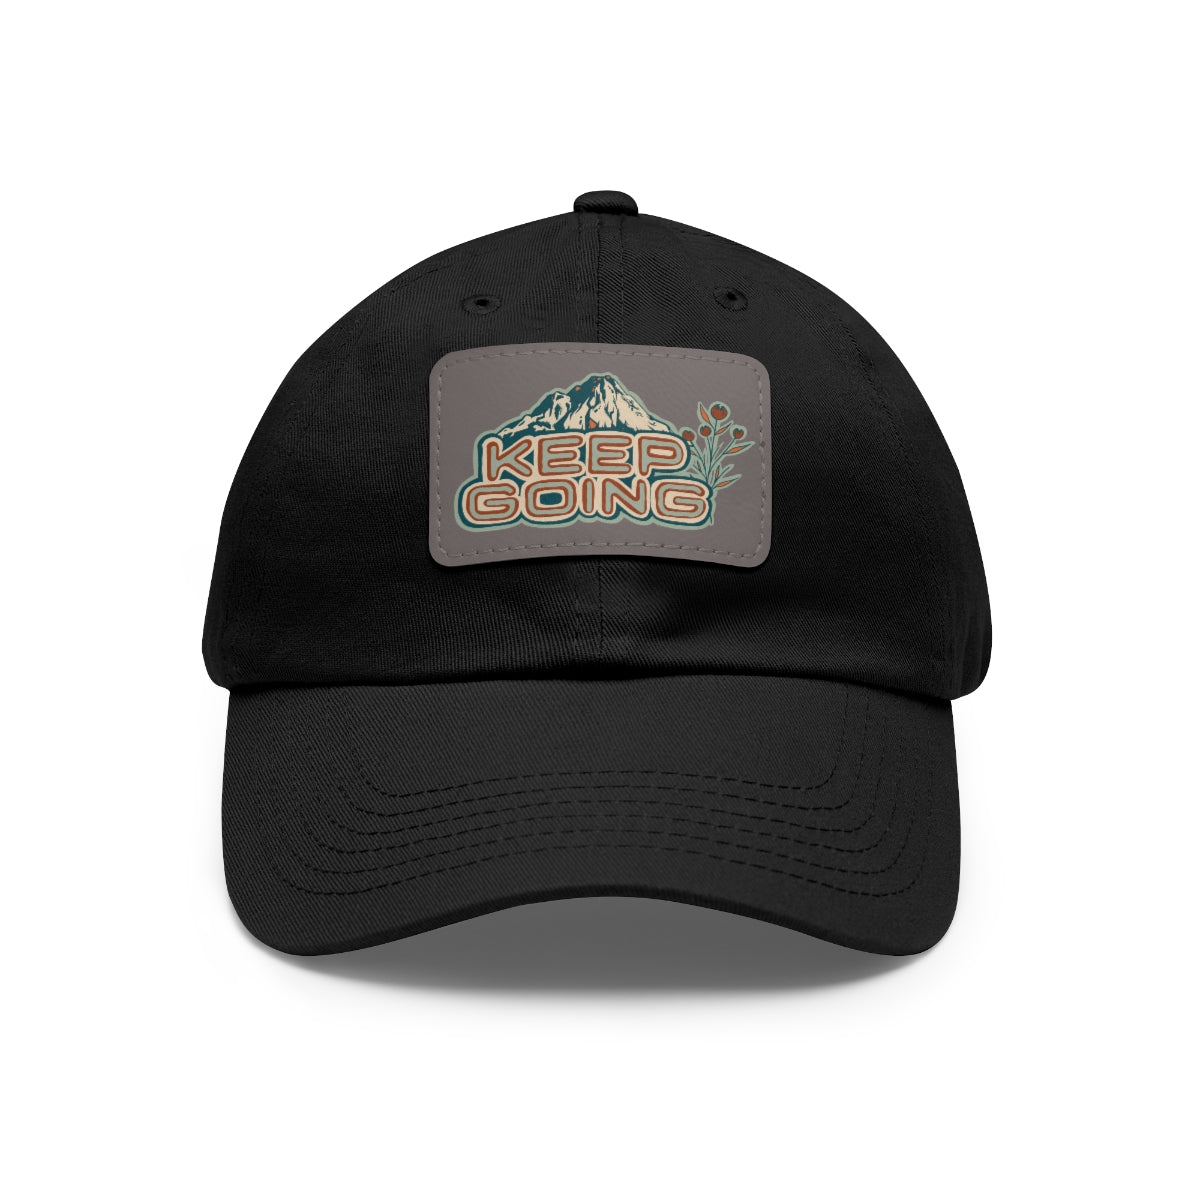 Keep Going Dad Hat with Leather Patch